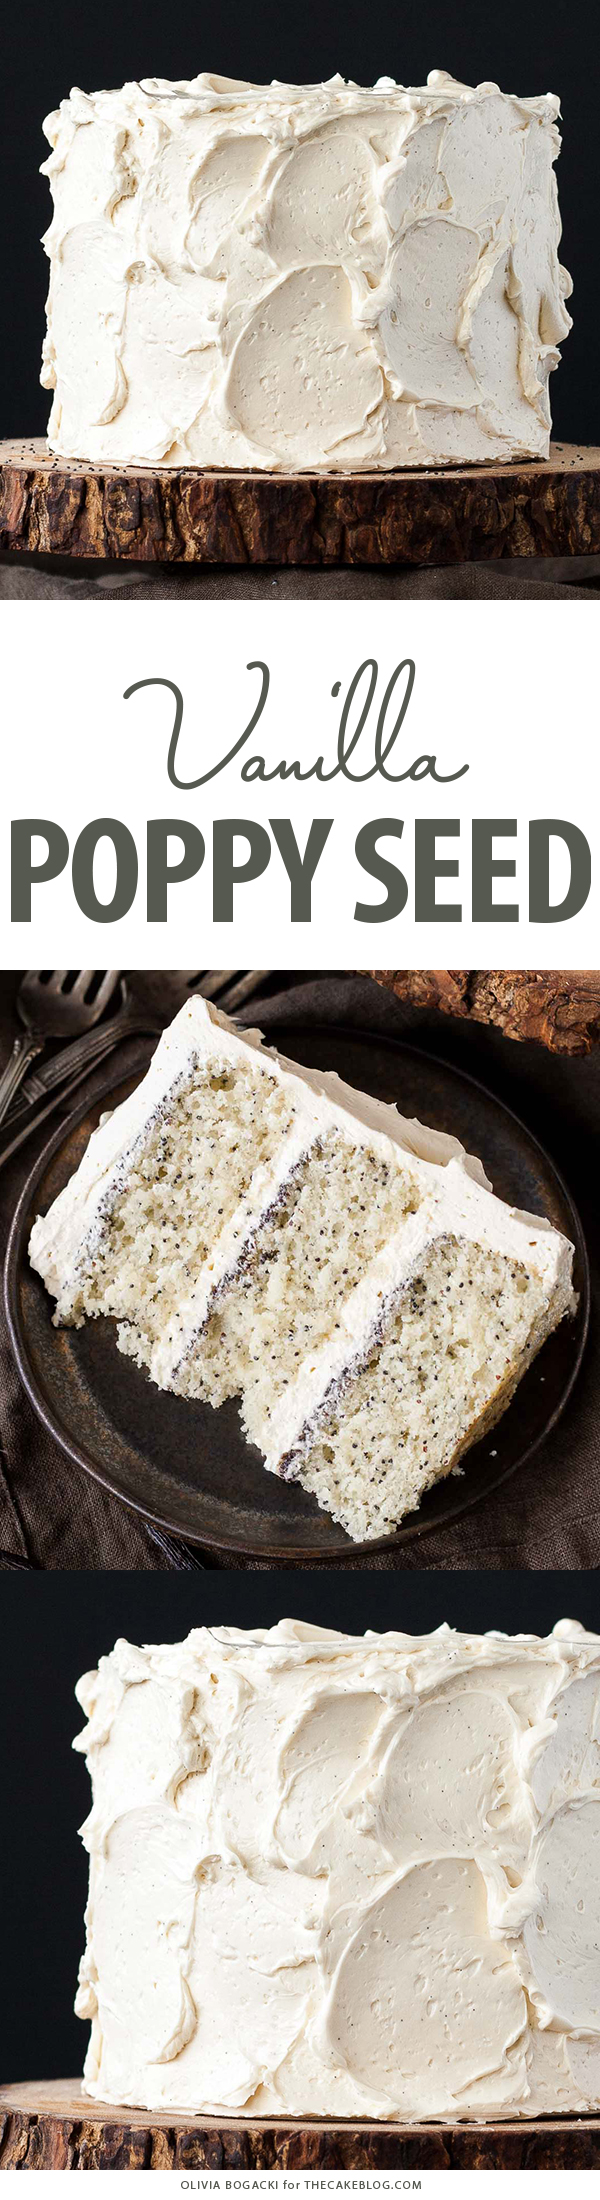 Poppy Seed Cake - poppy seed studded cake with vanilla bean frosting and poppy seed filling | by Olivia Bogacki for TheCakeBlog.com